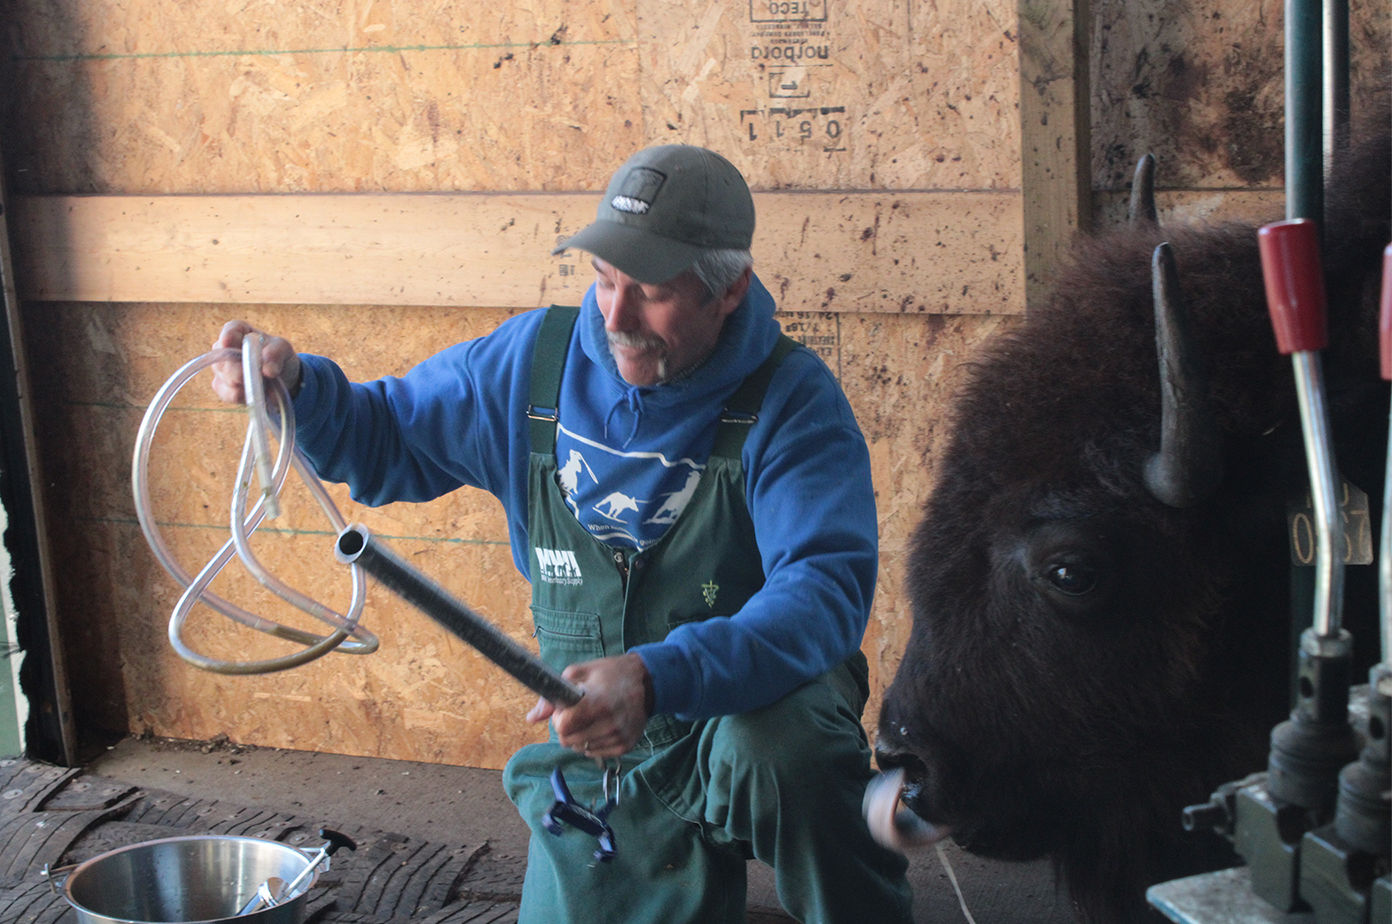 Tom Bragg kneels next to a bison in the chute. He is working with a sample collection tube connected to the bison's mouth.